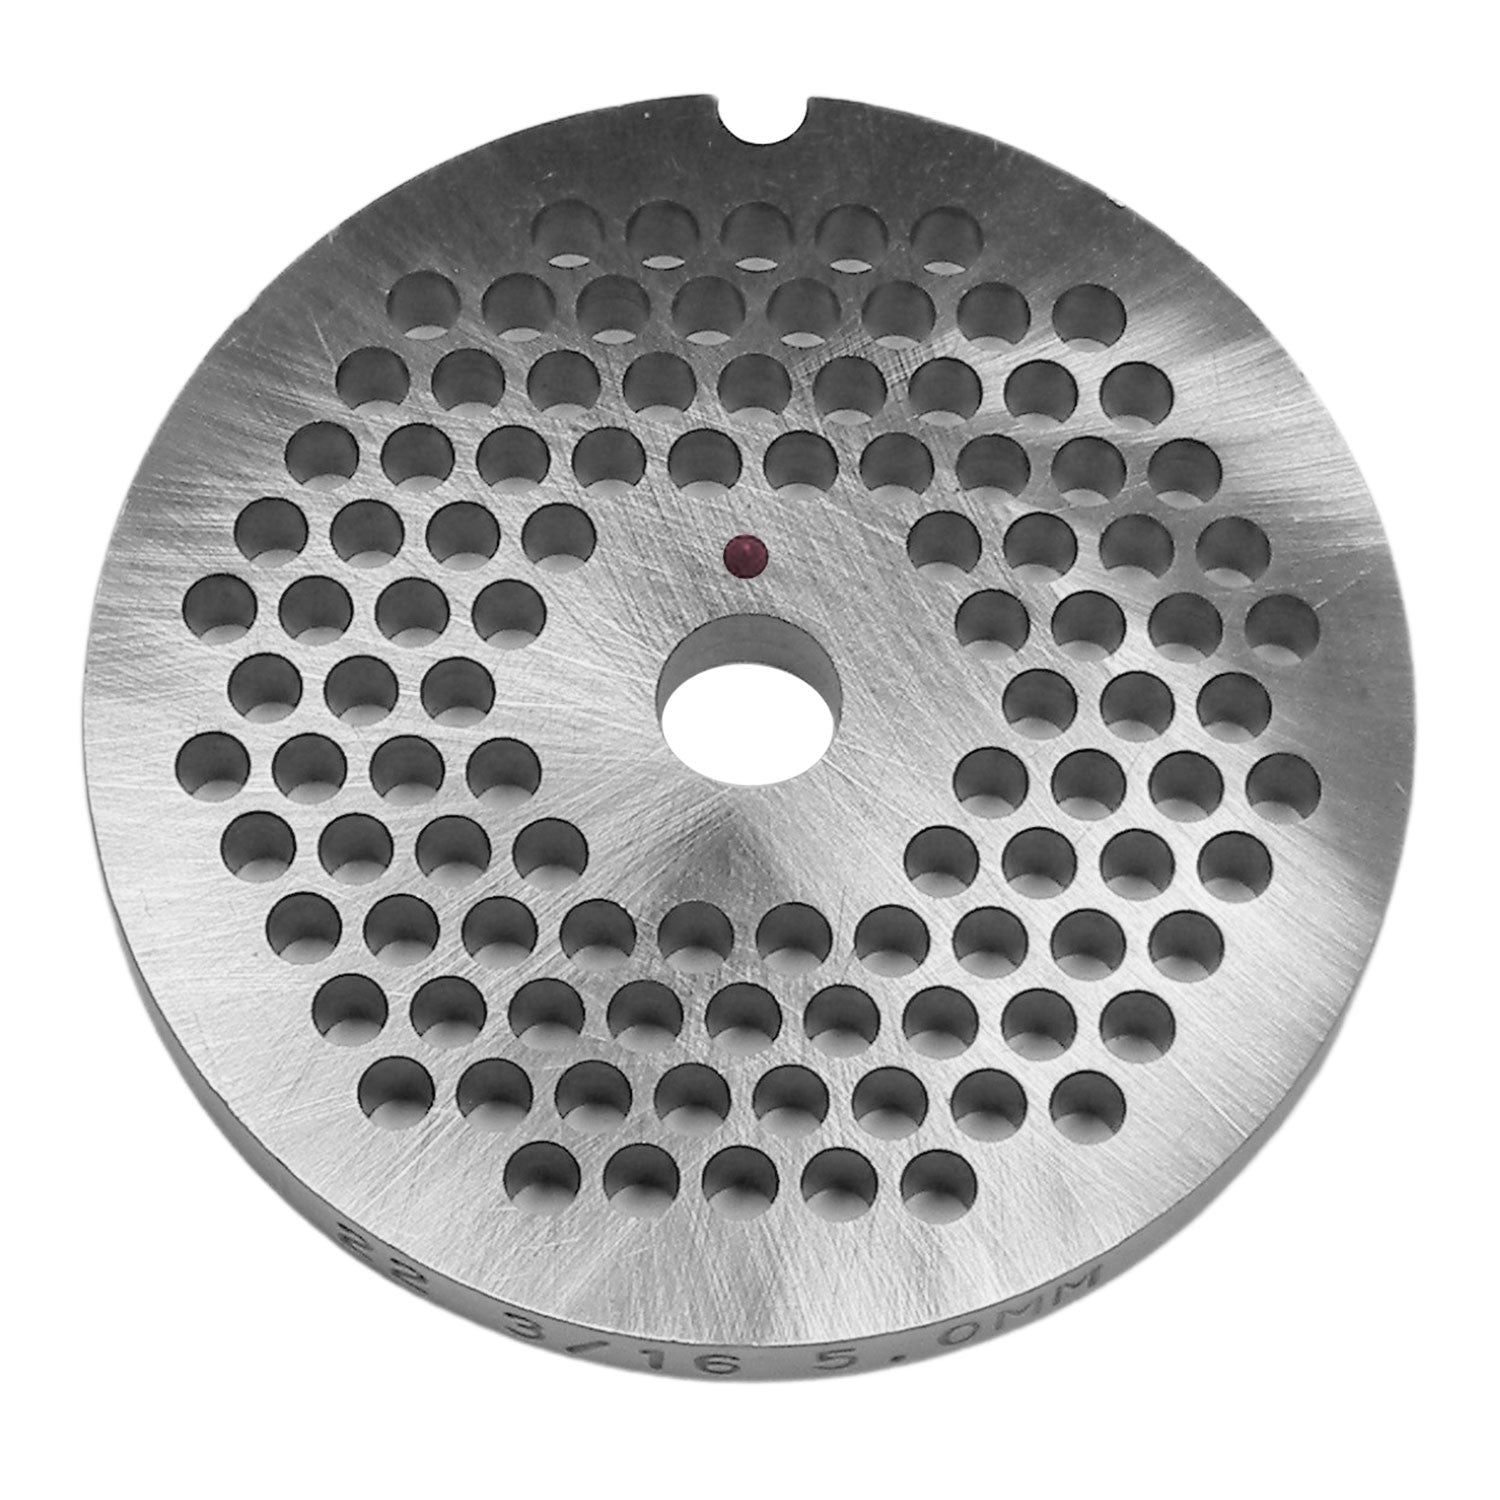 Size 22 DC Reversible Meat Grinder Plate, 3/16